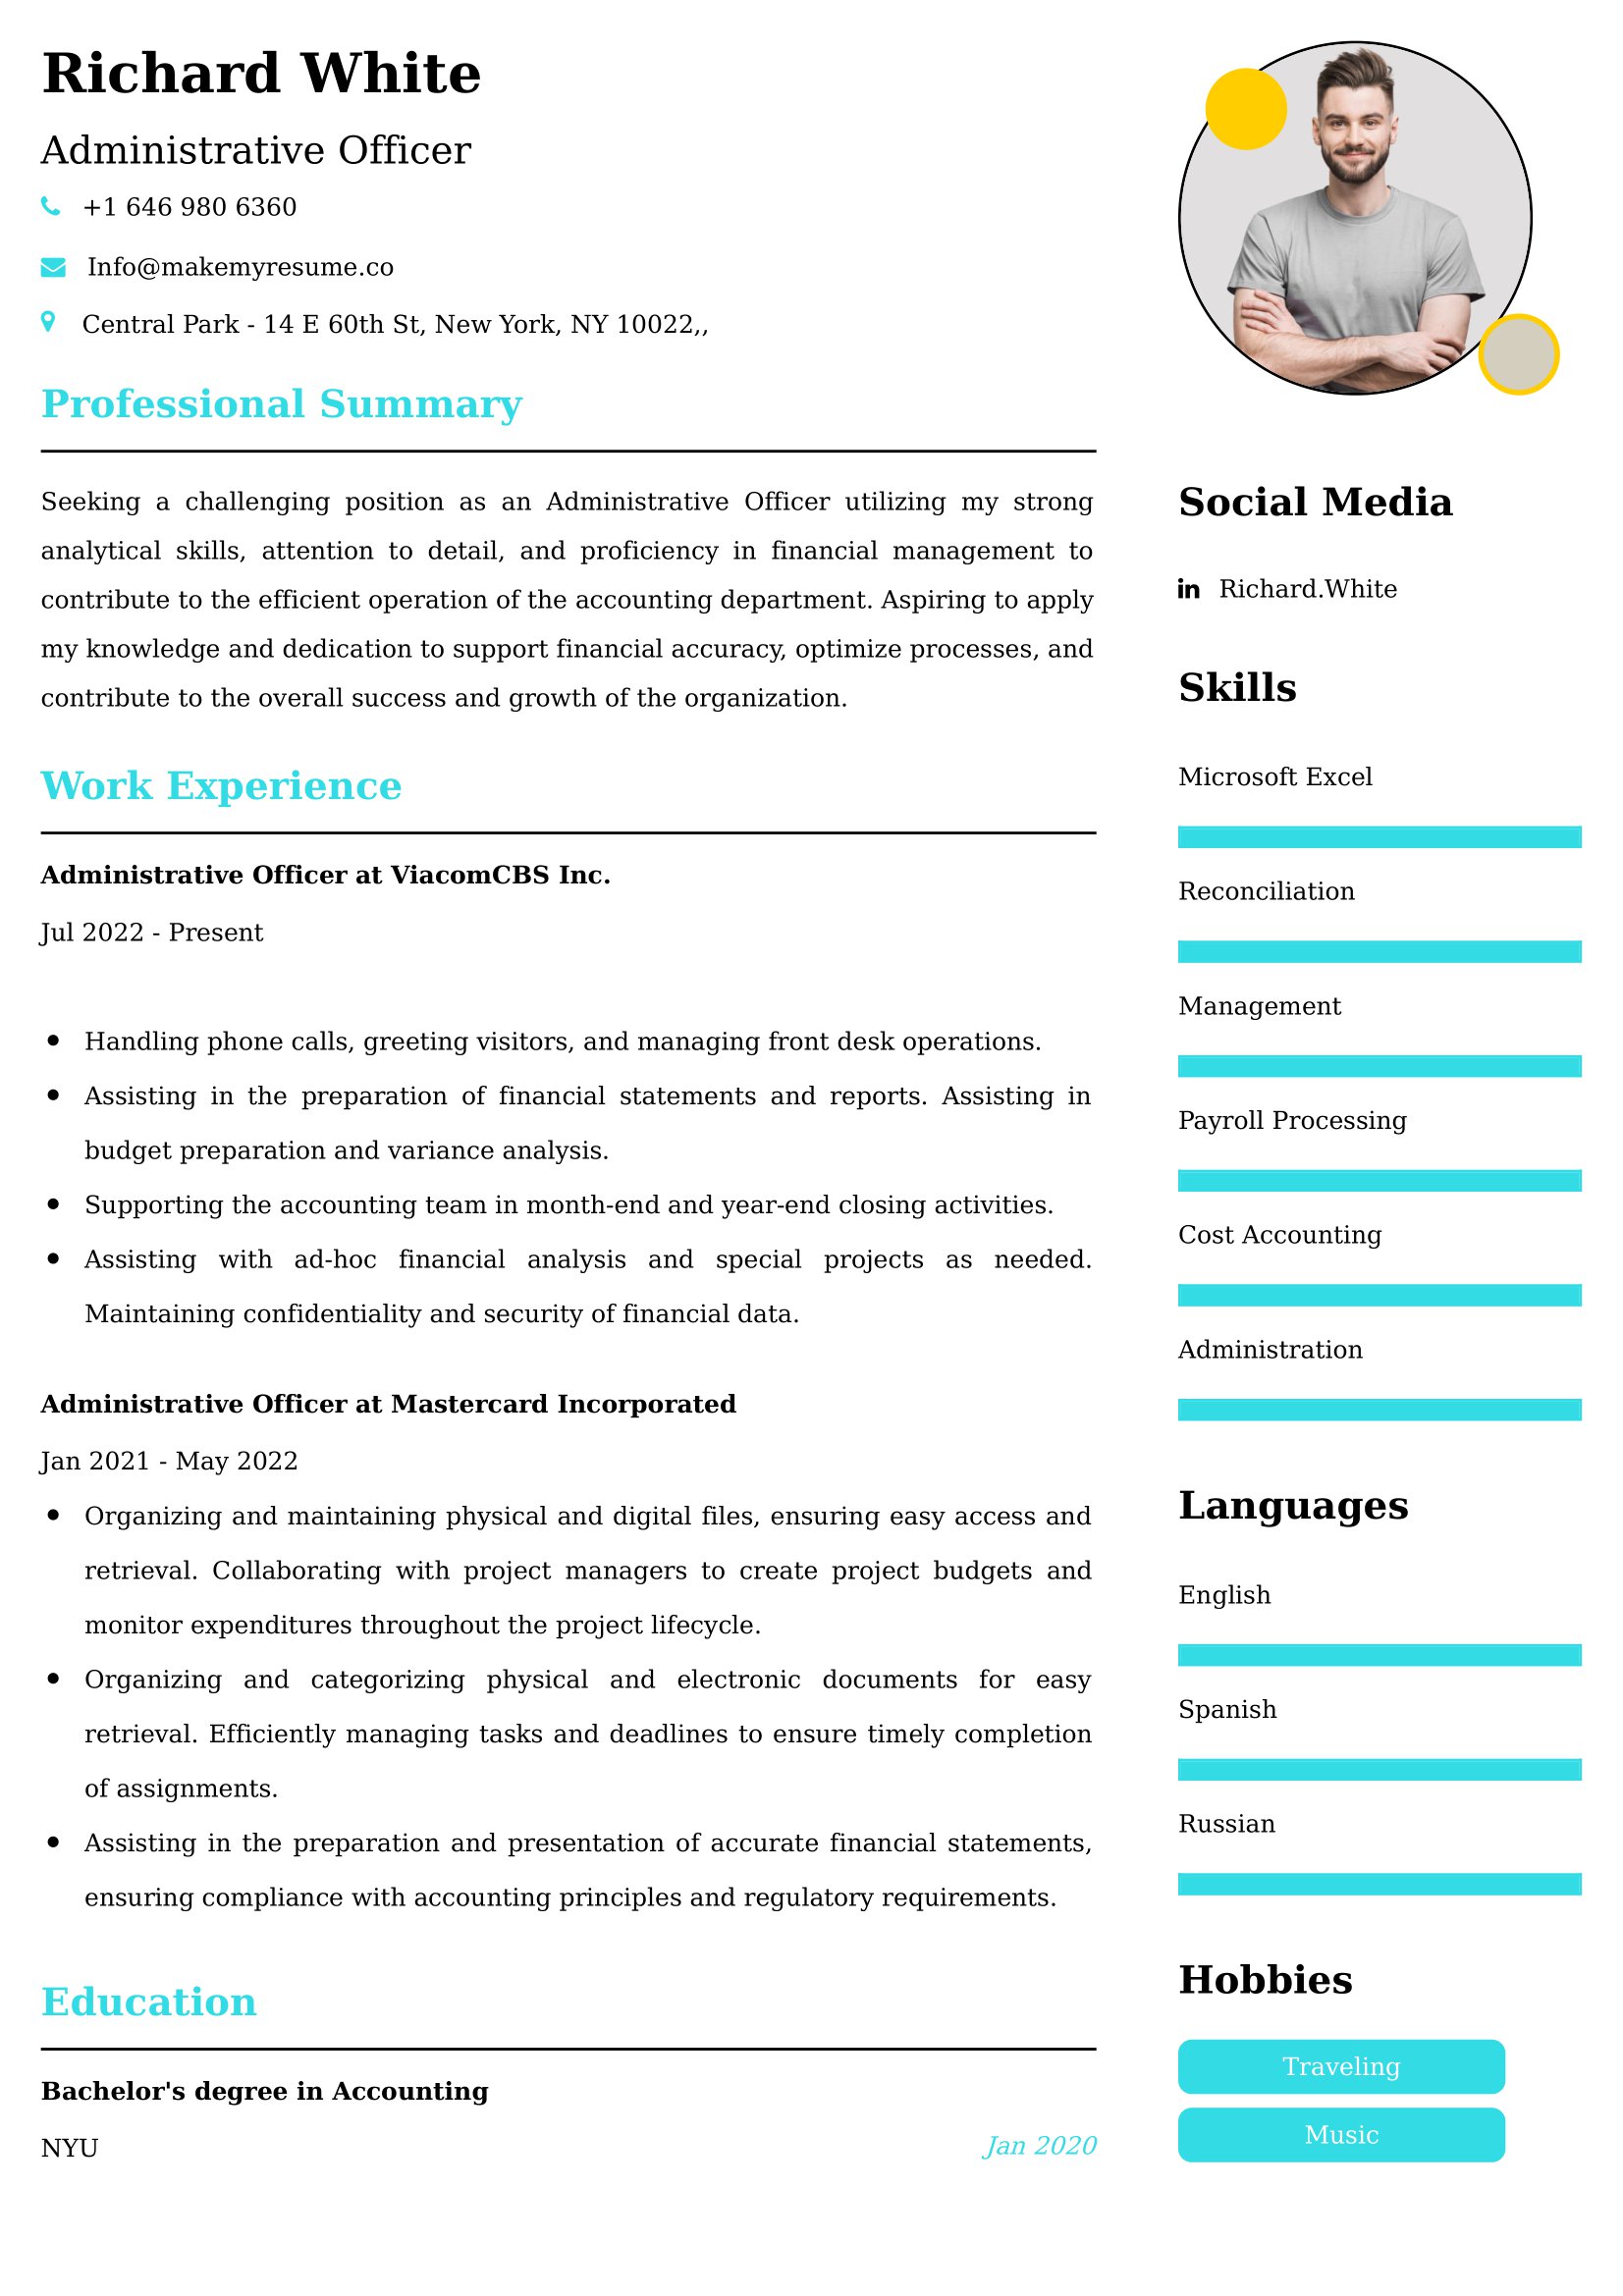 Administrative Officer Resume Examples for UAE